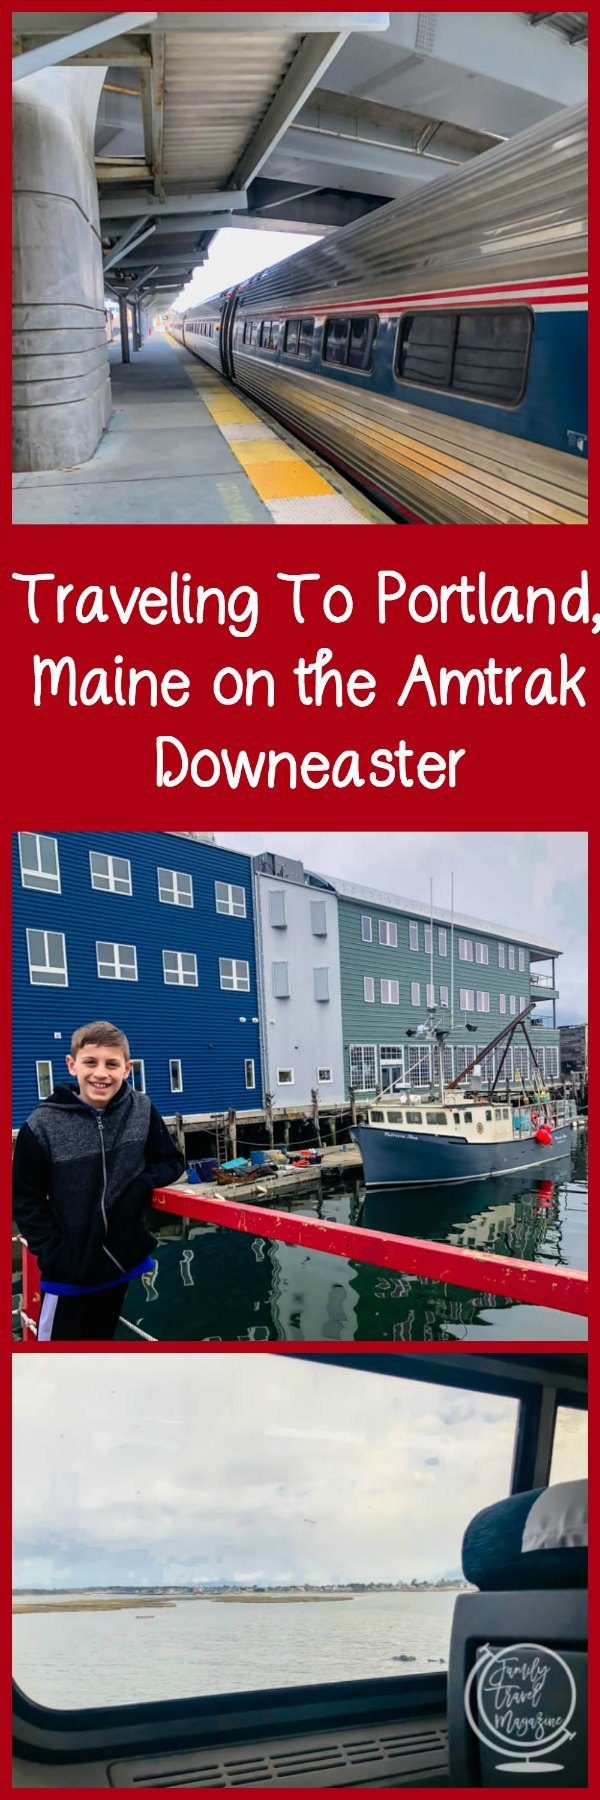  Traveling To Portland on the Amtrak Downeaster